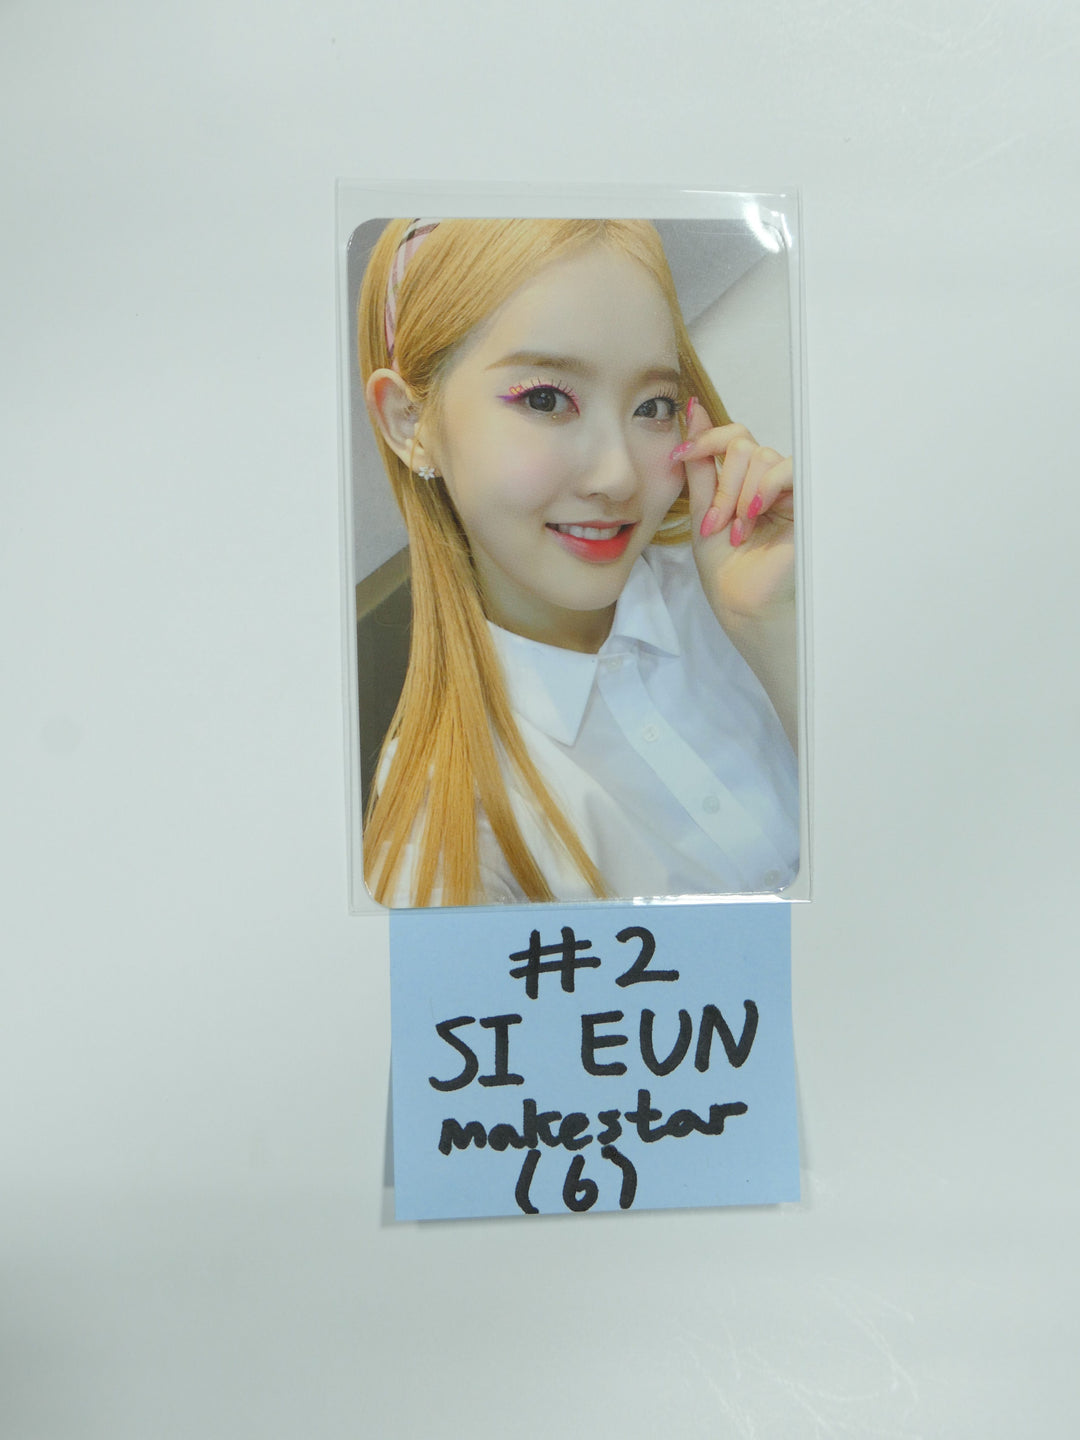 StayC 'STEREOTYPE' - Makestar Fansign Event Photocard Round 3